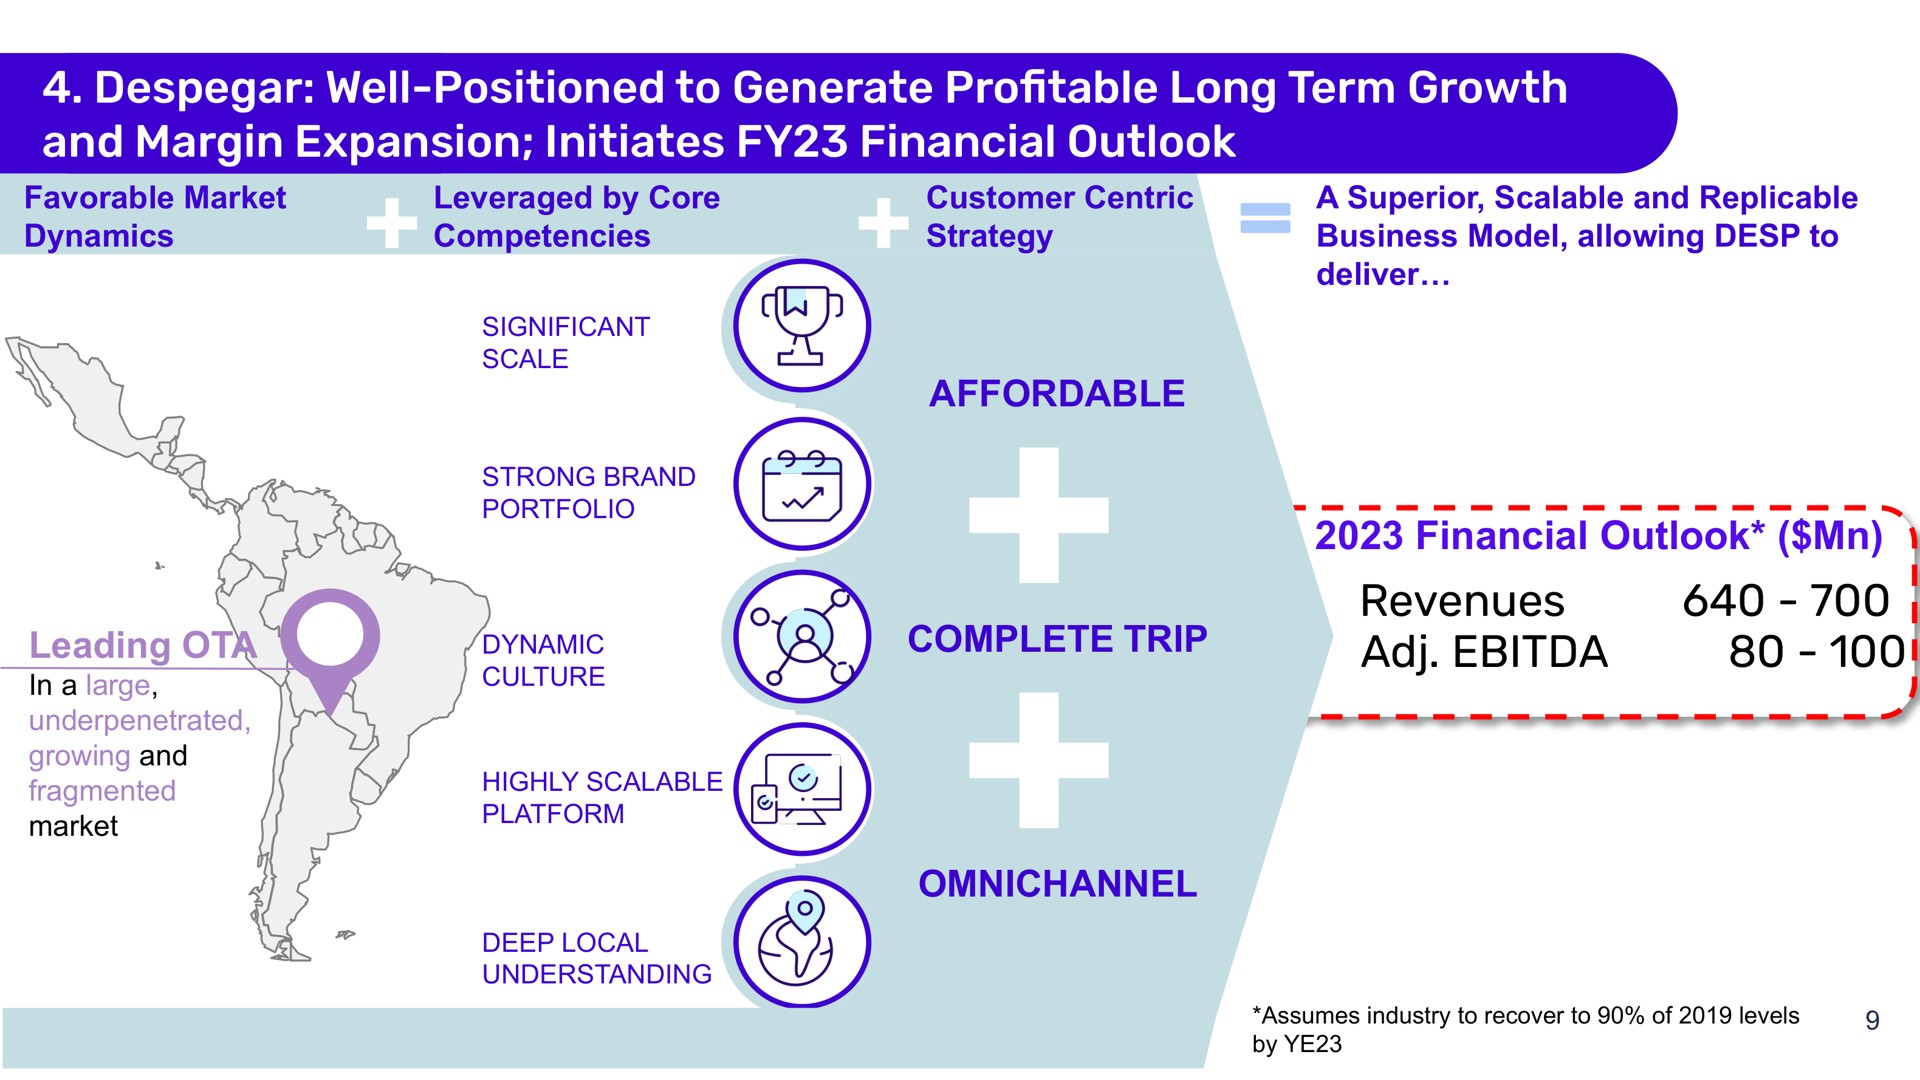 well positioned to generate pro table long term growth and margin expansion initiates financial outlook revenues profitable affordable a complete trip | Despegar